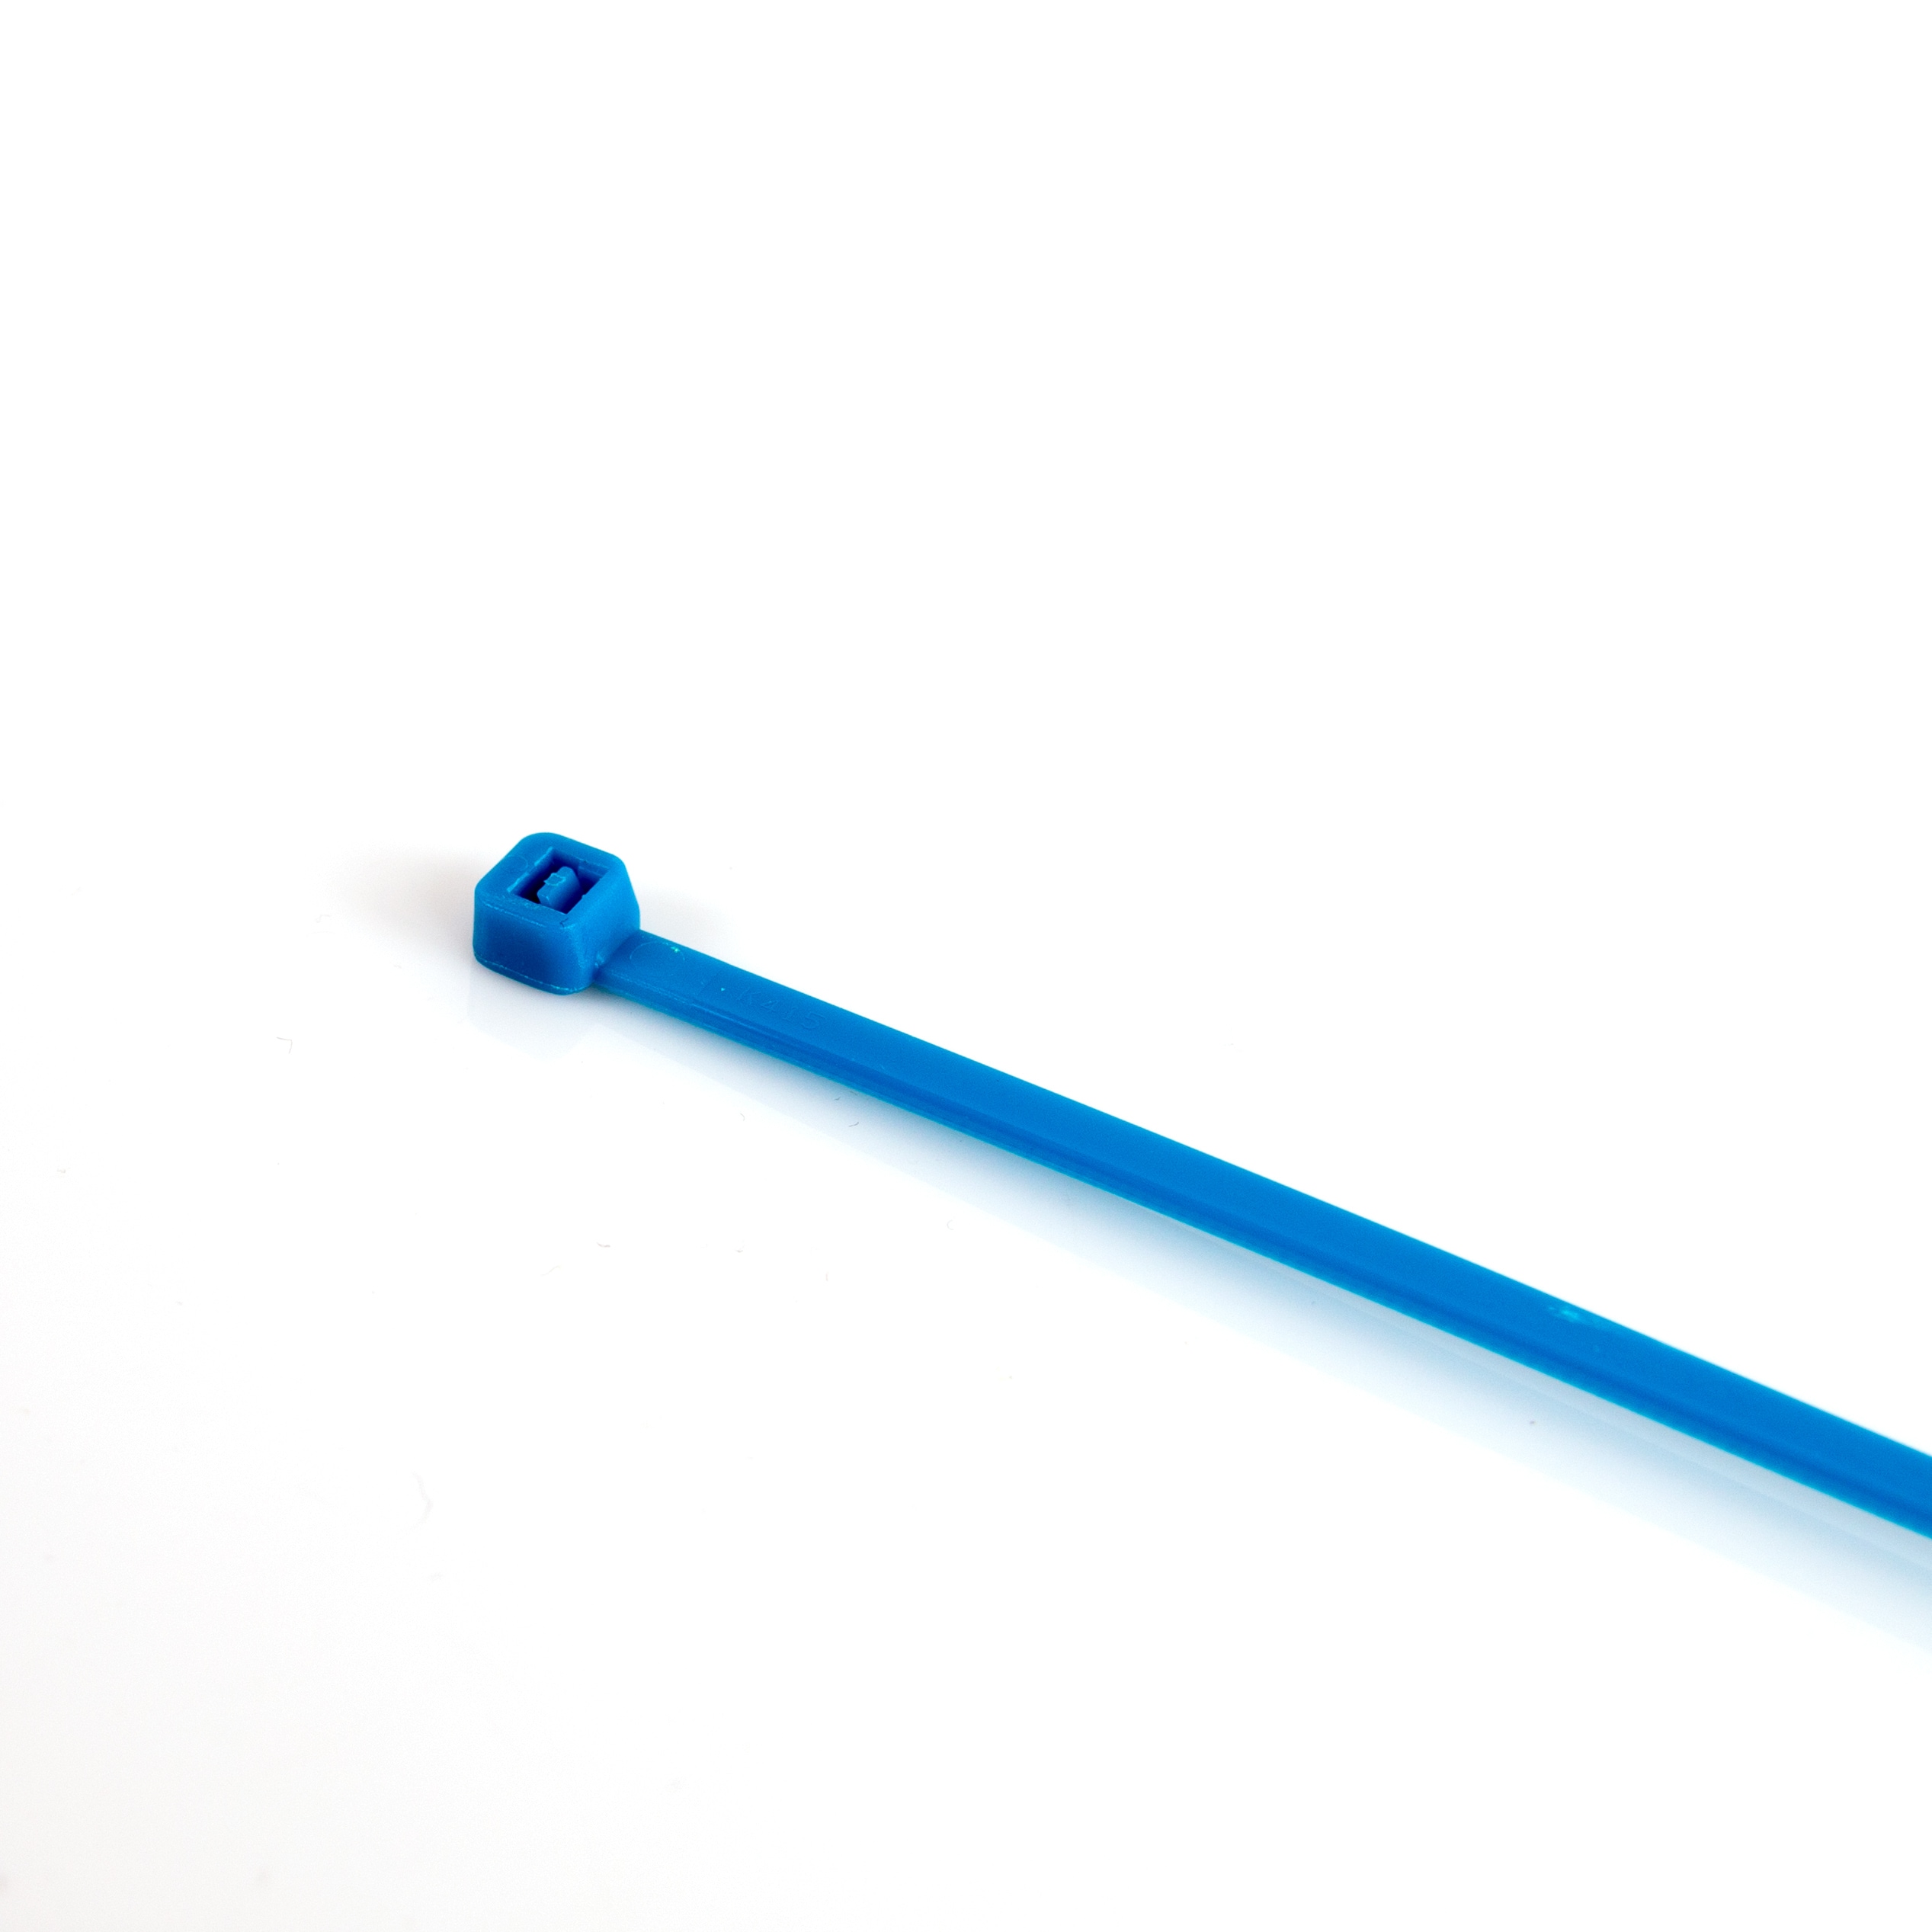 Cable Ties 200x4,8 100 pc Blue